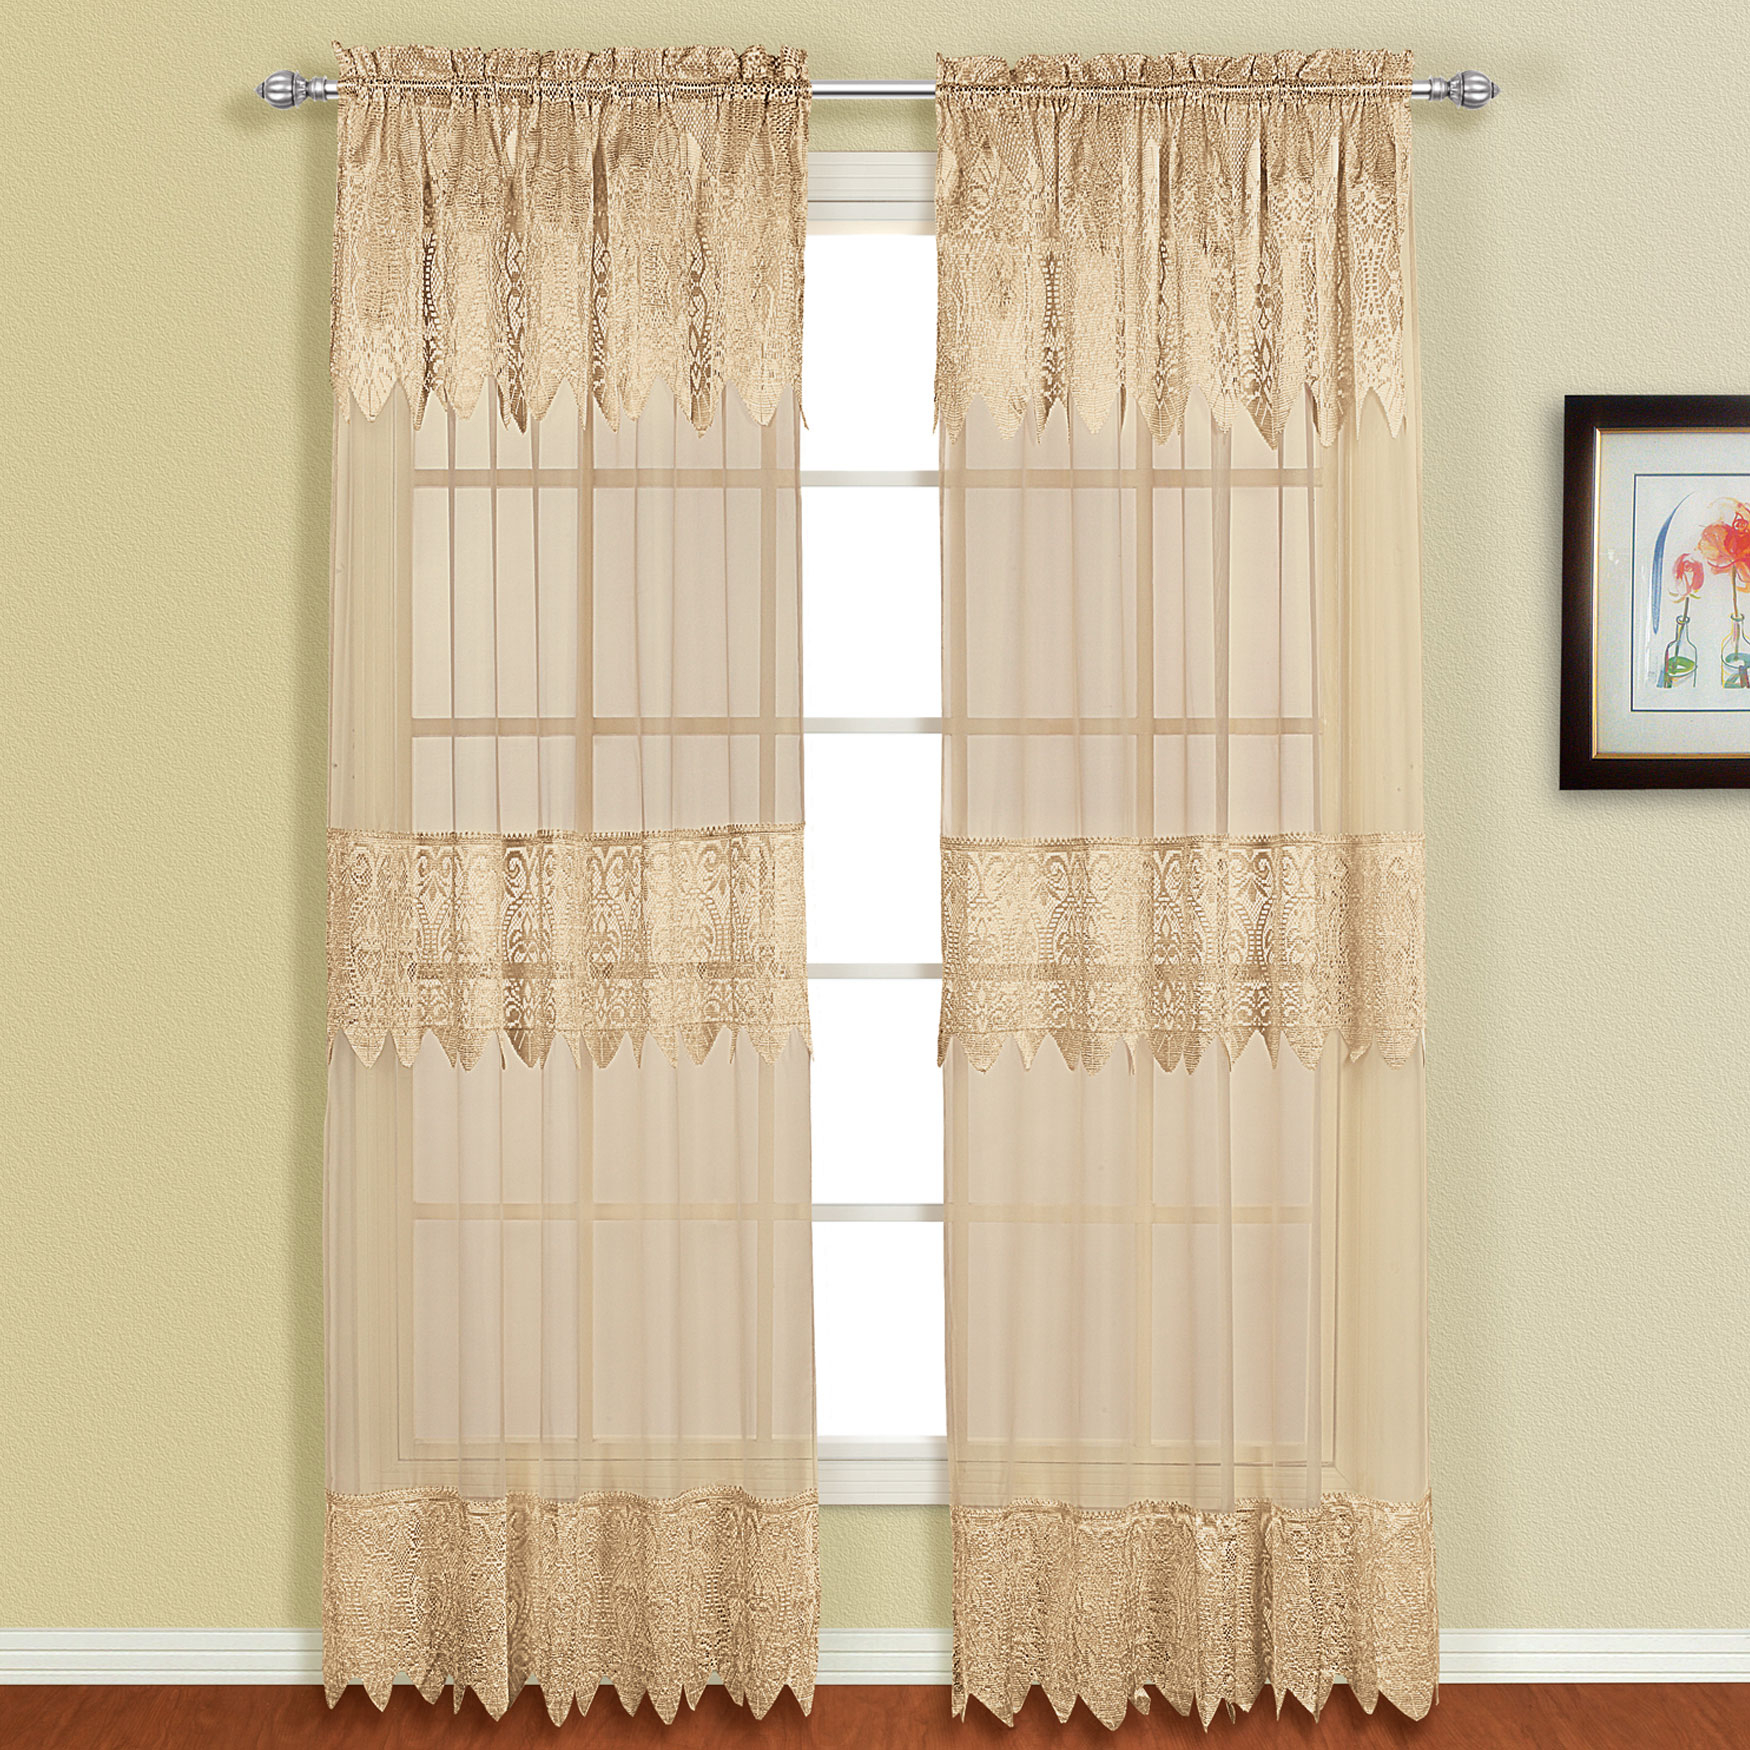 Curtains with valances attached 4